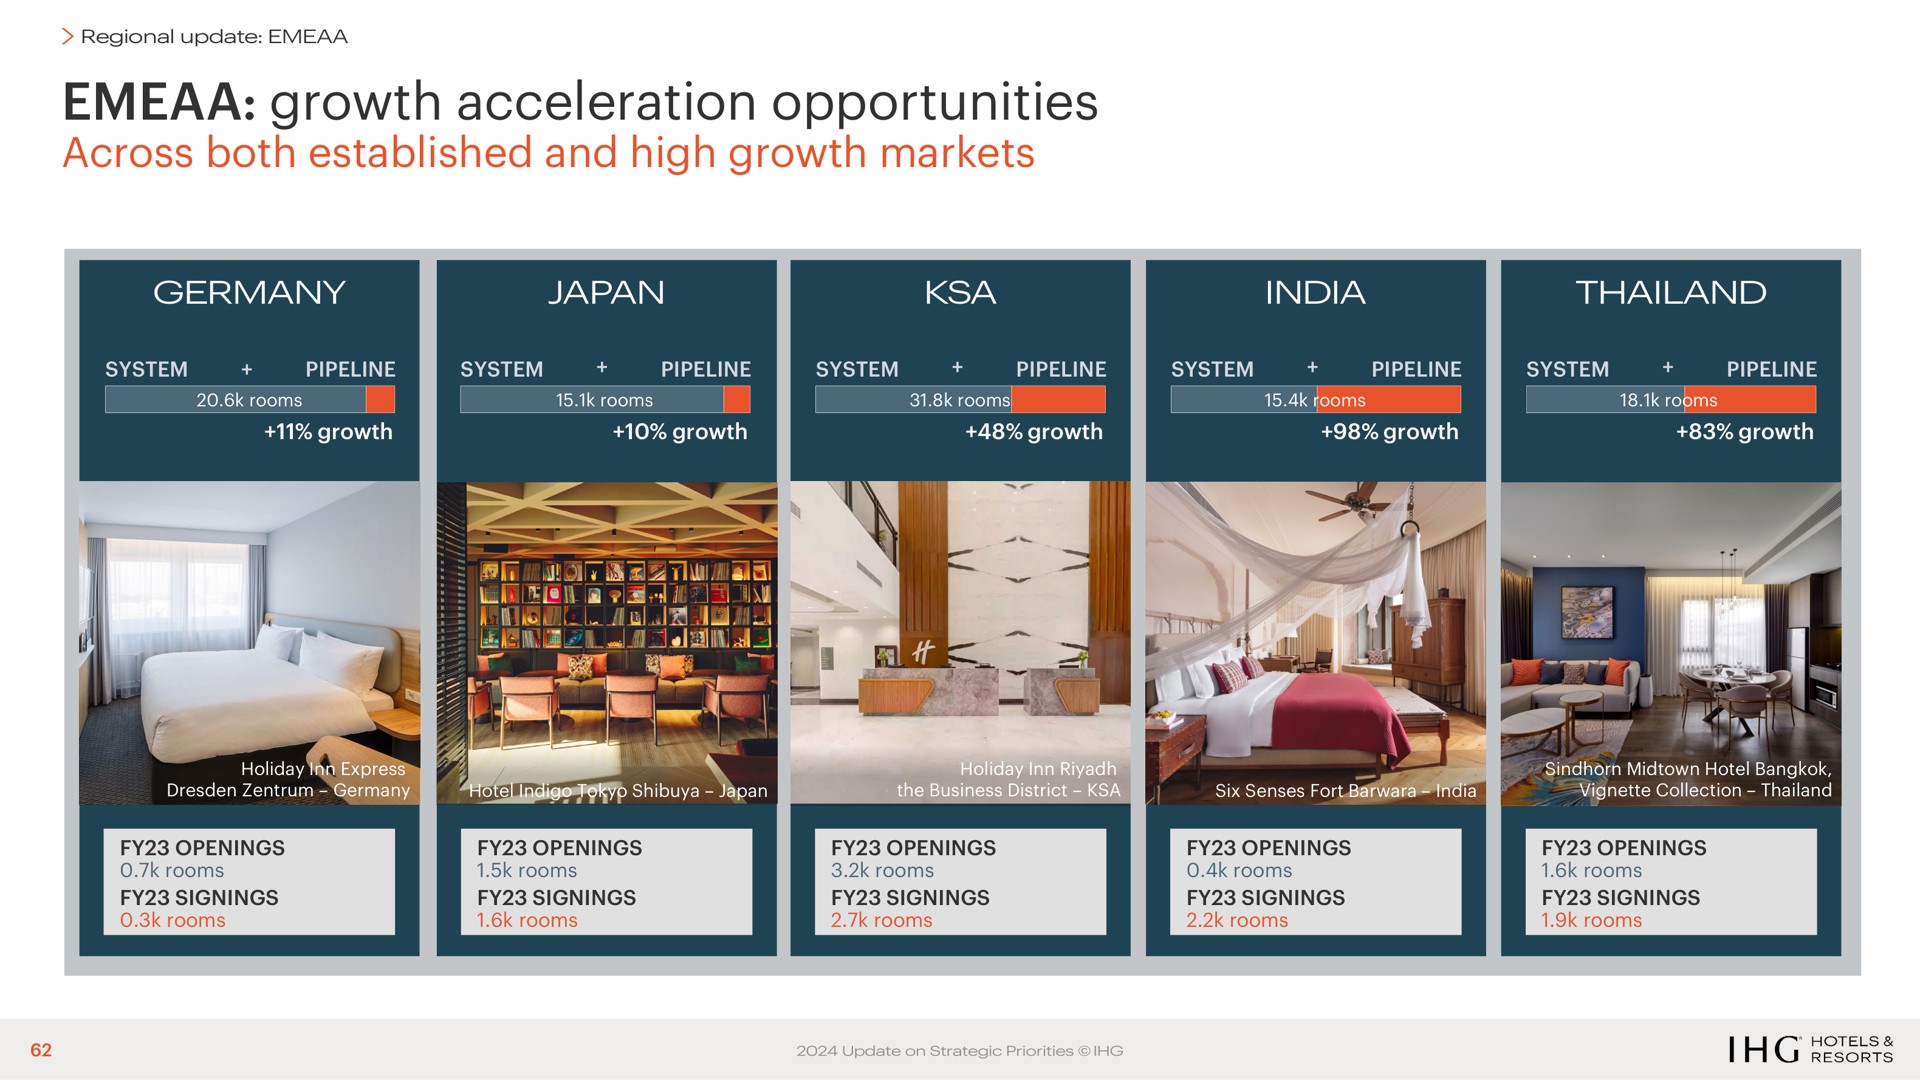 growth acceleration opportunities across both established and high growth markets | IHG Hotels